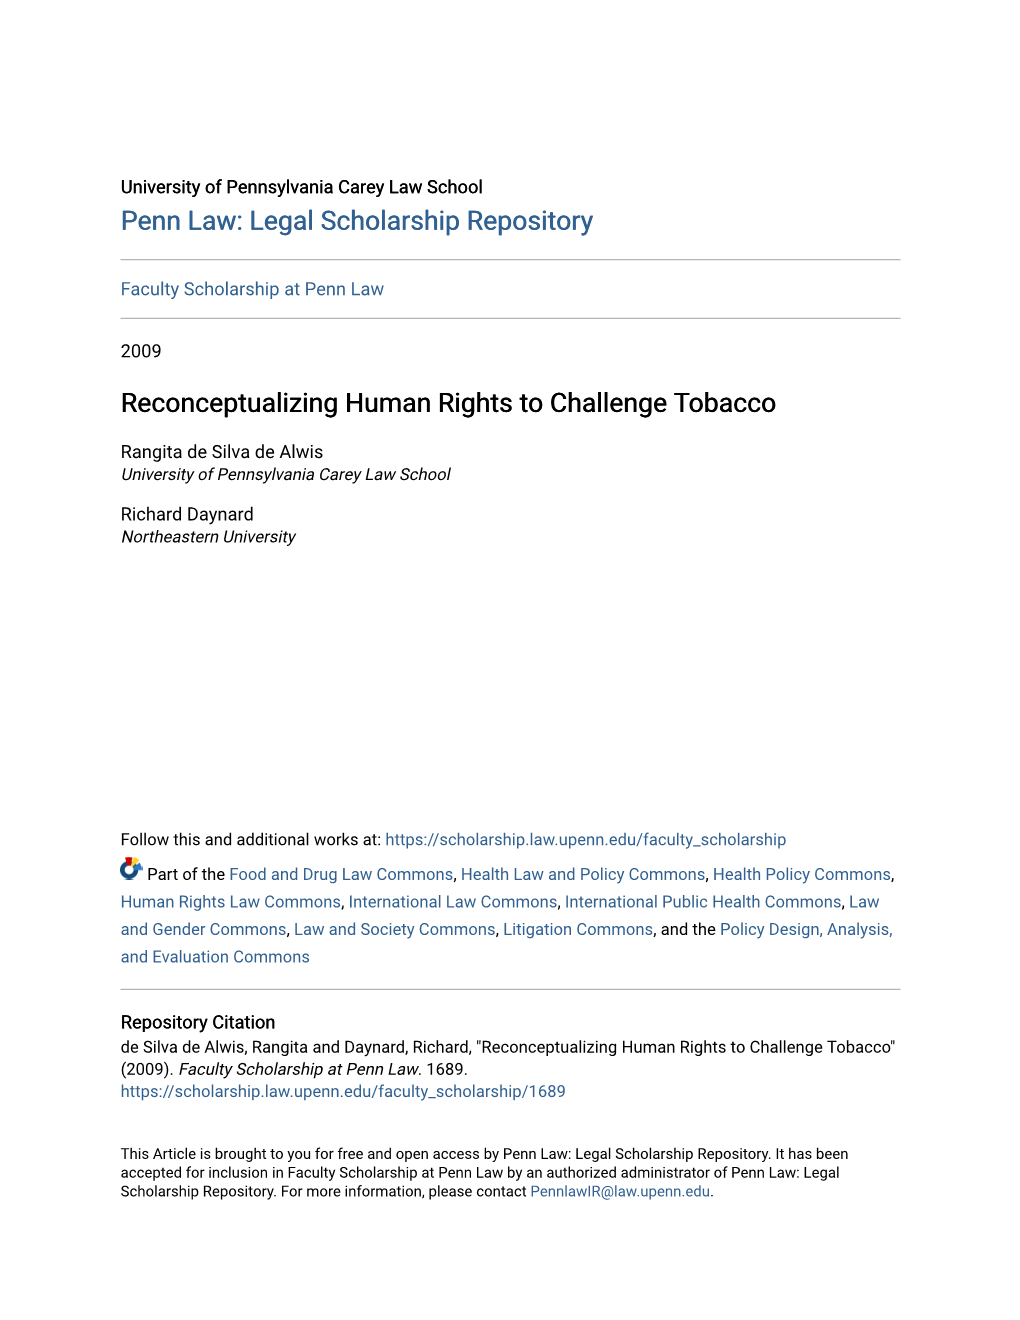 Reconceptualizing Human Rights to Challenge Tobacco